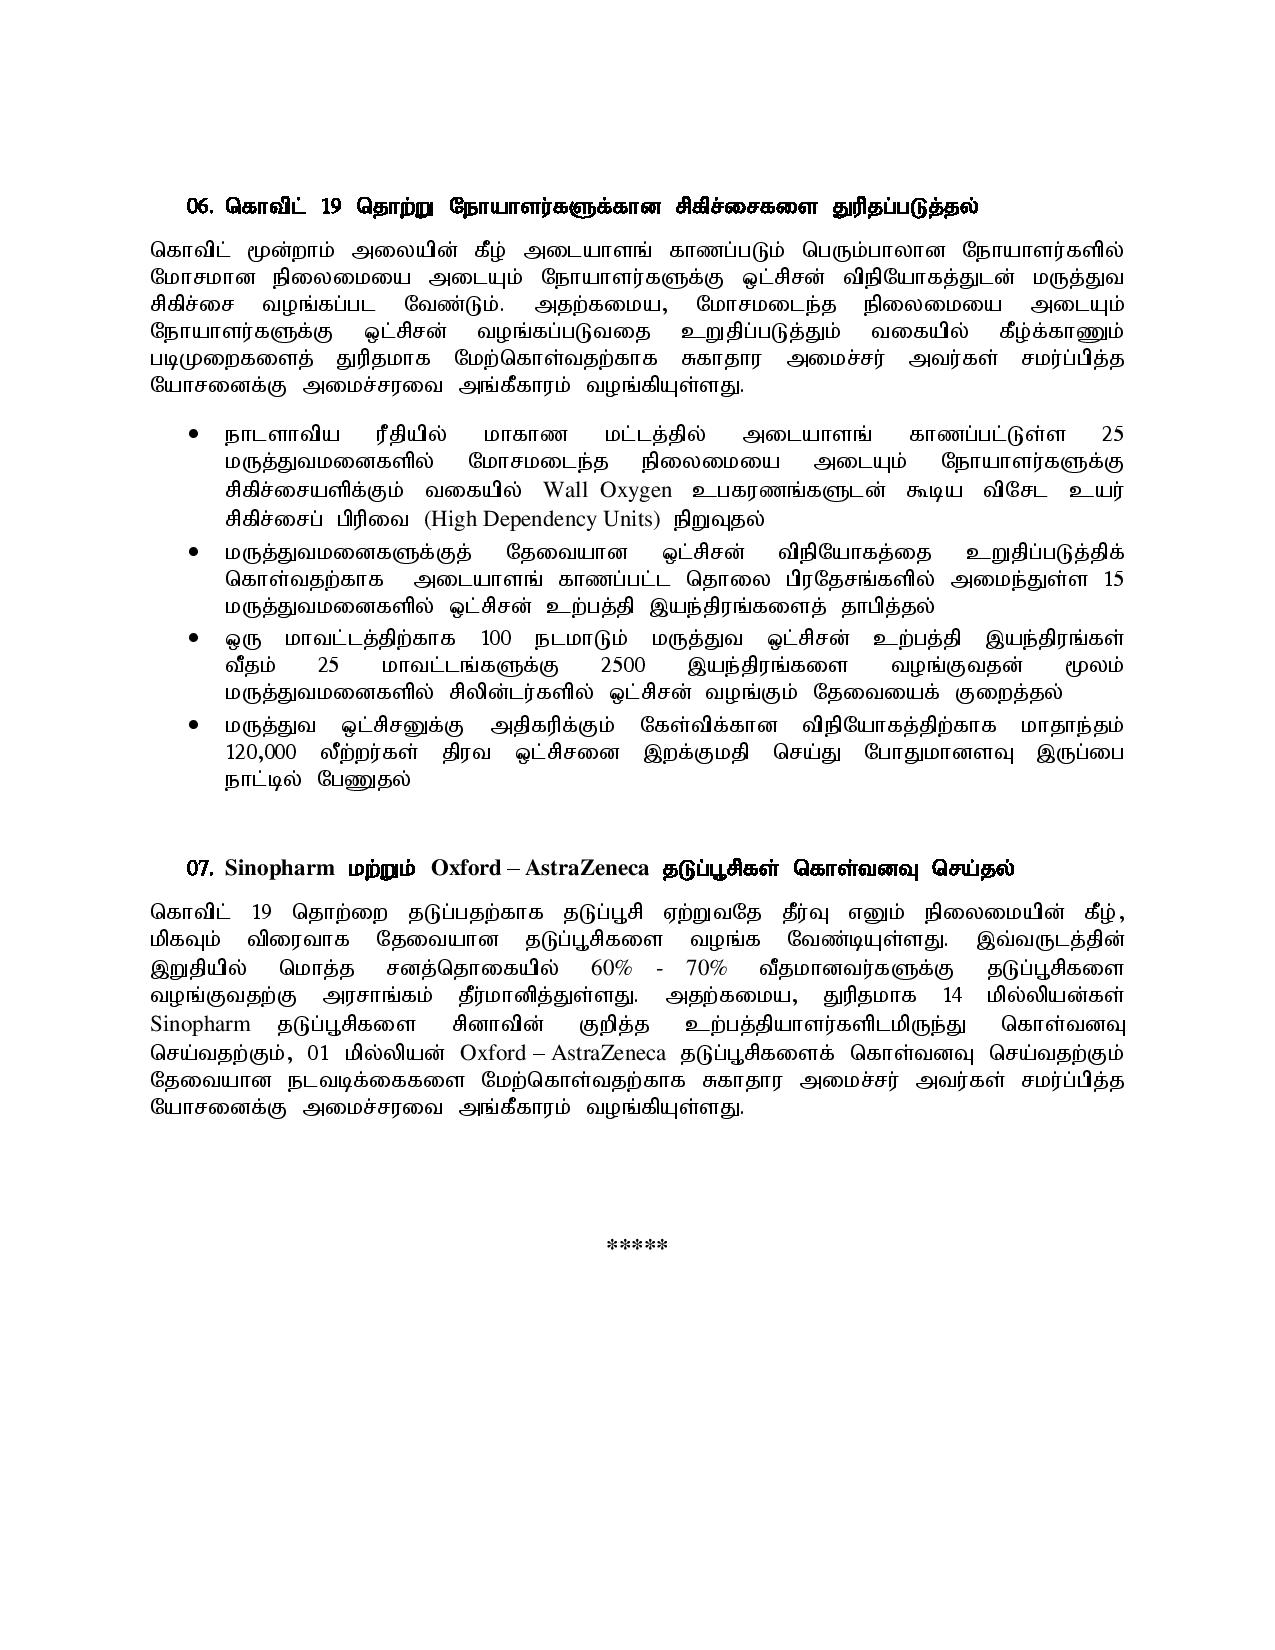 Cabinet Decision on 24.05.2021 Tamil 1 page 003